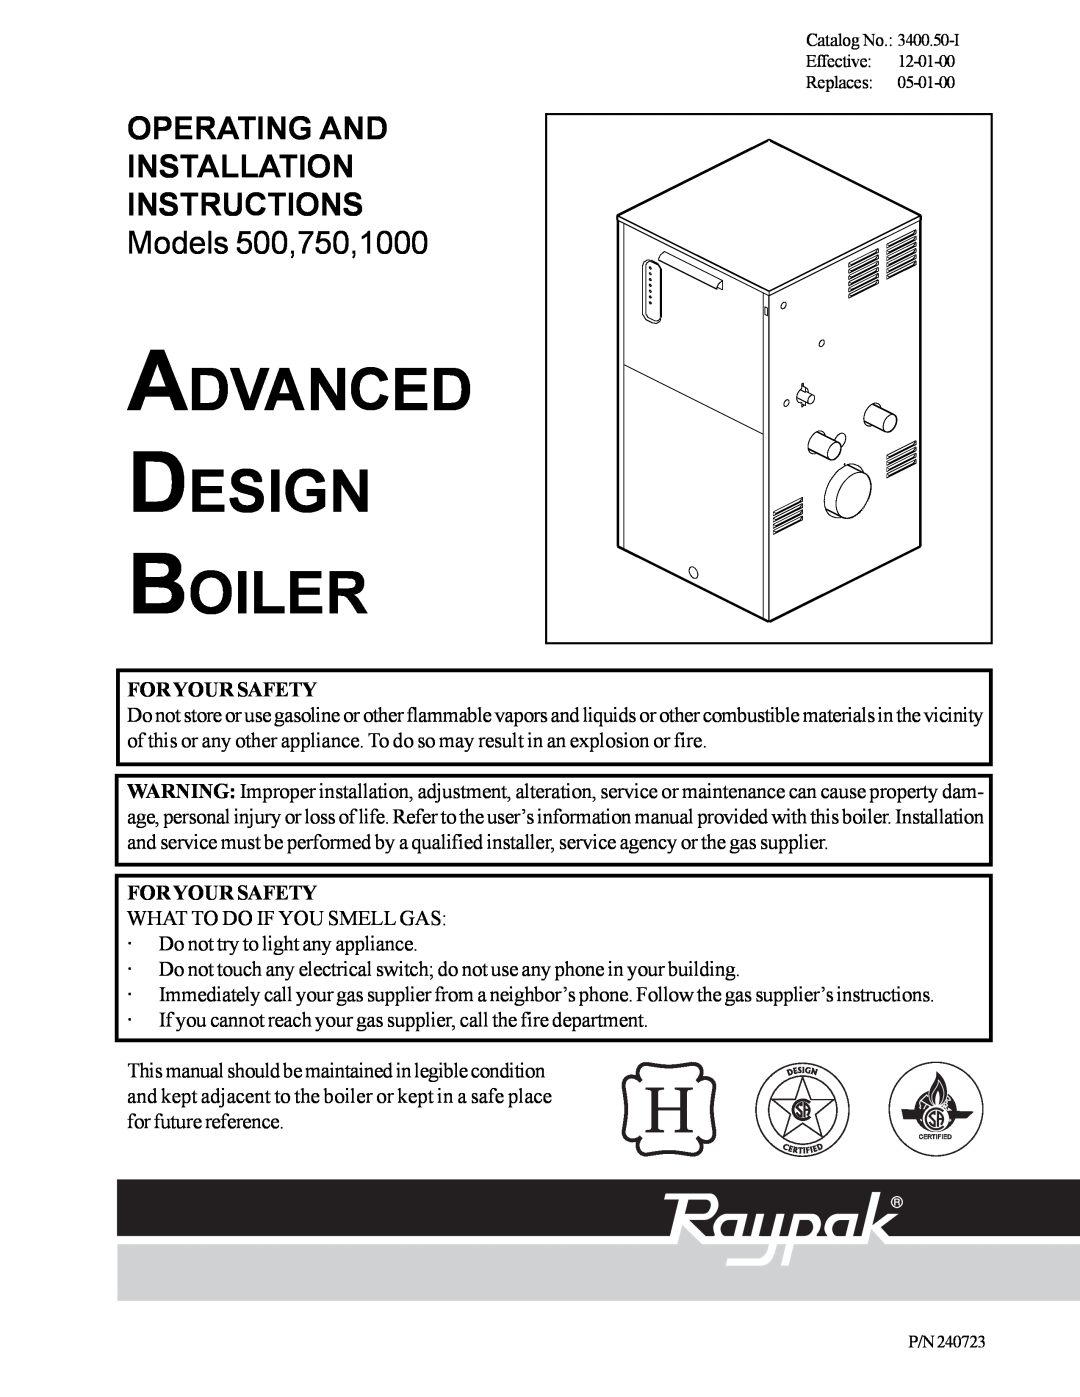 Raypak installation instructions Operating And Installation Instructions, Models 500,750,1000, Advanced Design Boiler 